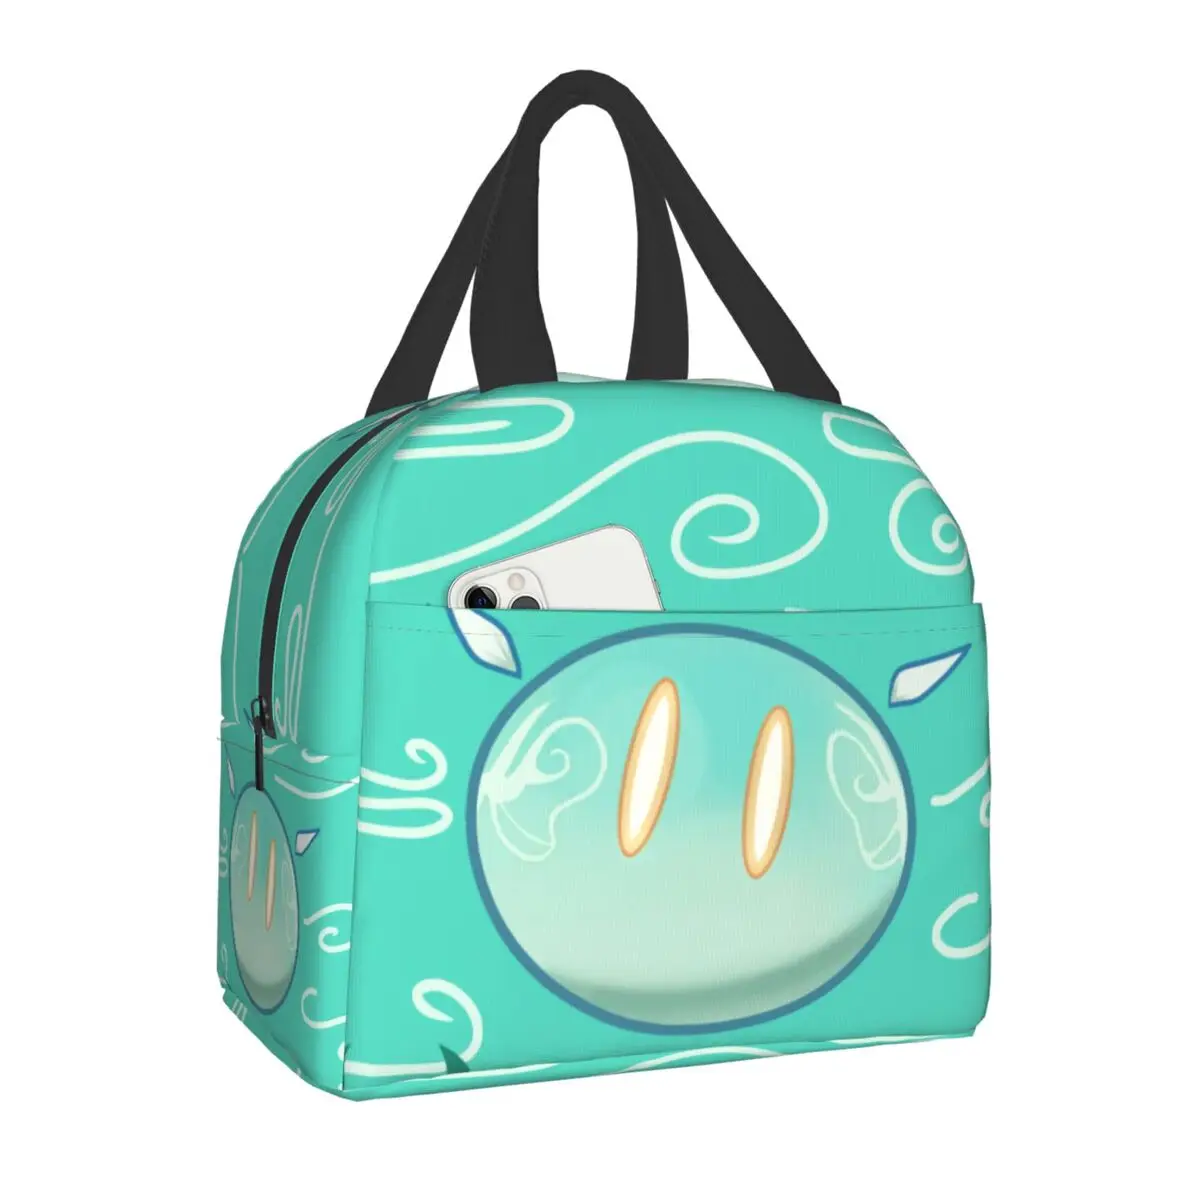 Anemo Slime Genshin Impact Insulated Lunch Tote Bag for Women Anime Game Portable Cooler Thermal Bento Box Camping Travel Picnic